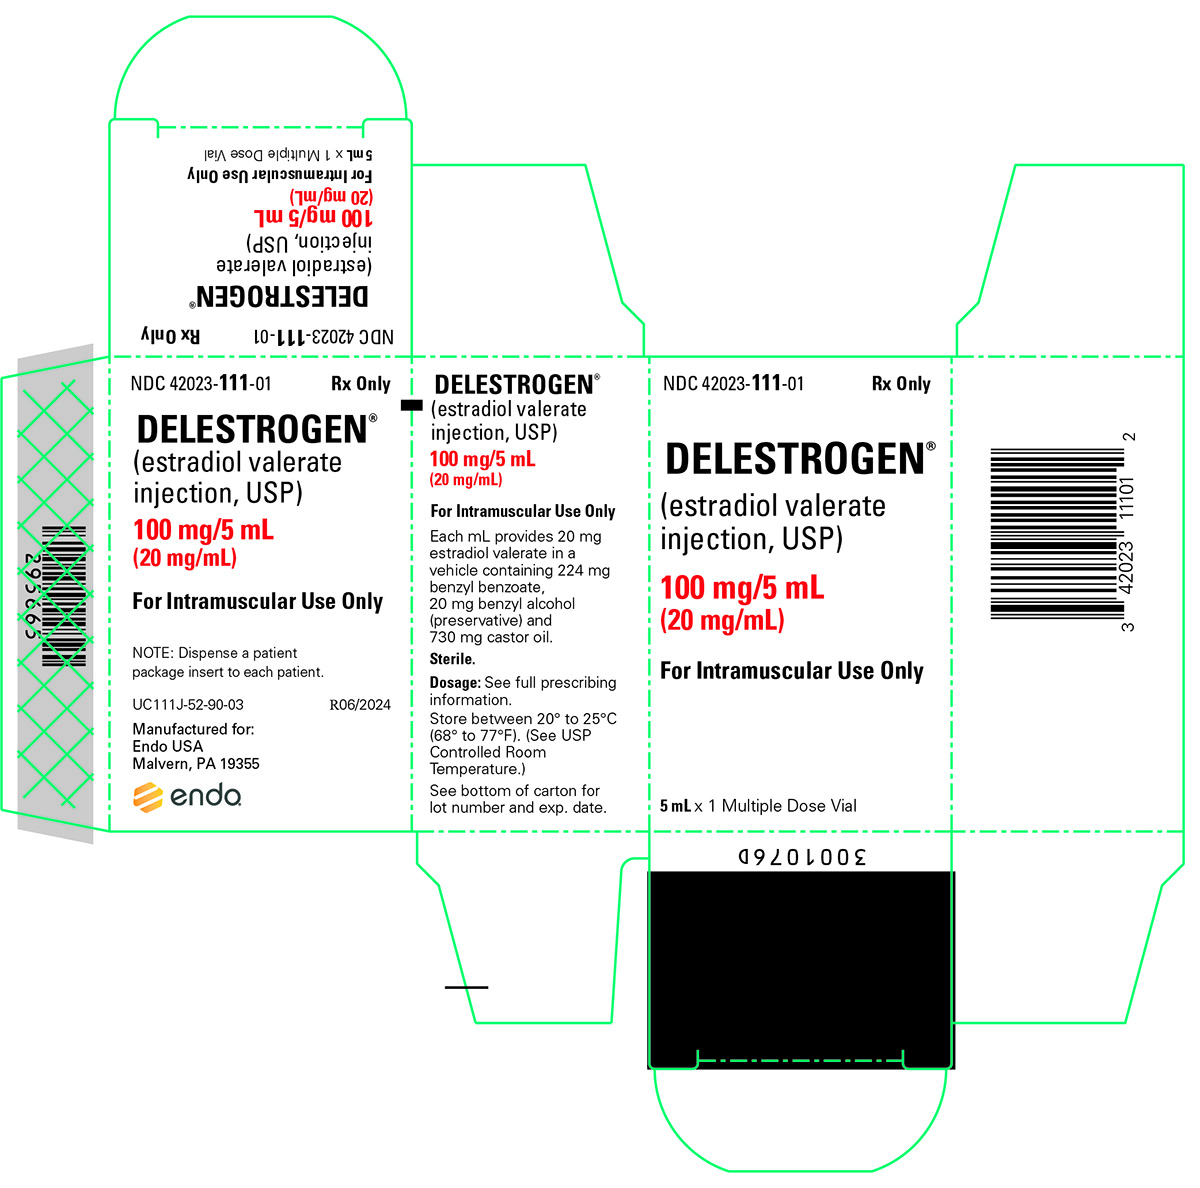 This is an image of Delestrogen® (estradiol valerate injection, USP) 100 mg/5 mL (20 mg/mL).